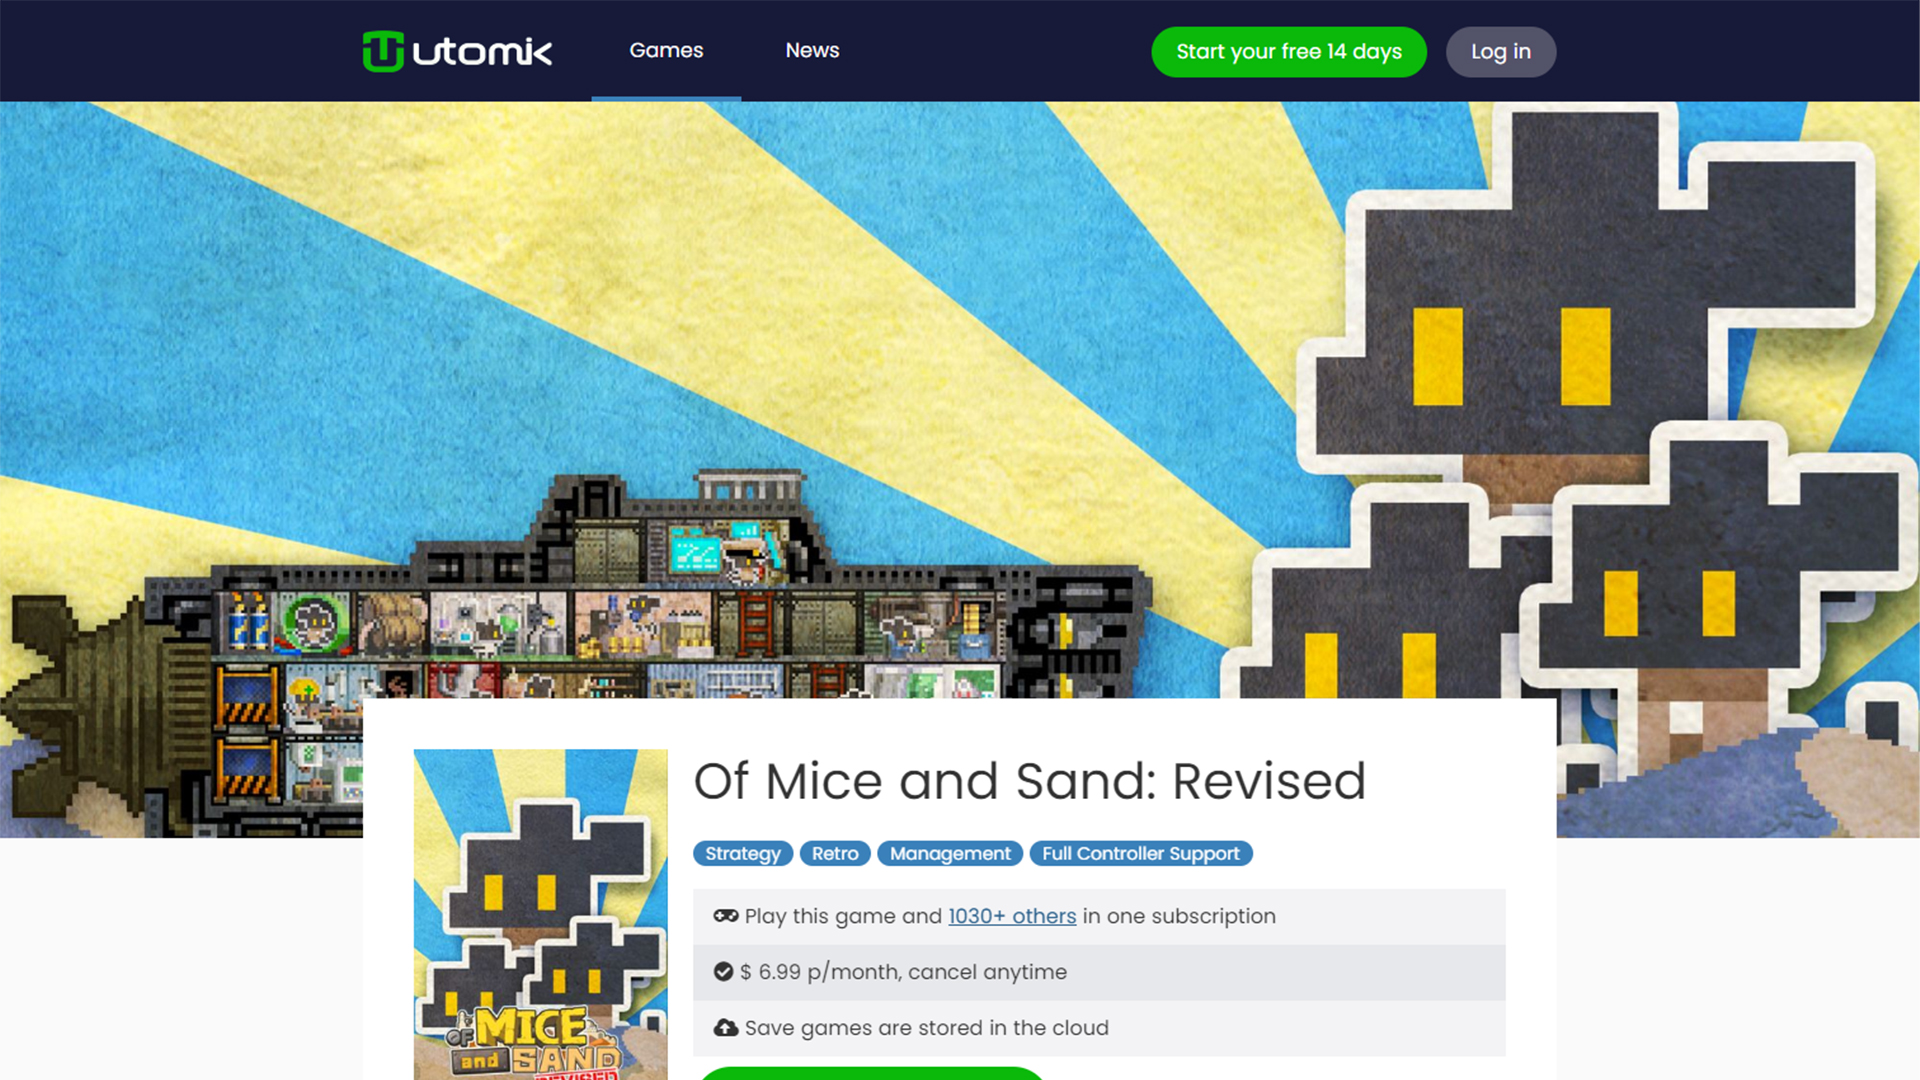 Of Mice and Sand Revised Now Available Game Subscription Service, Utomik